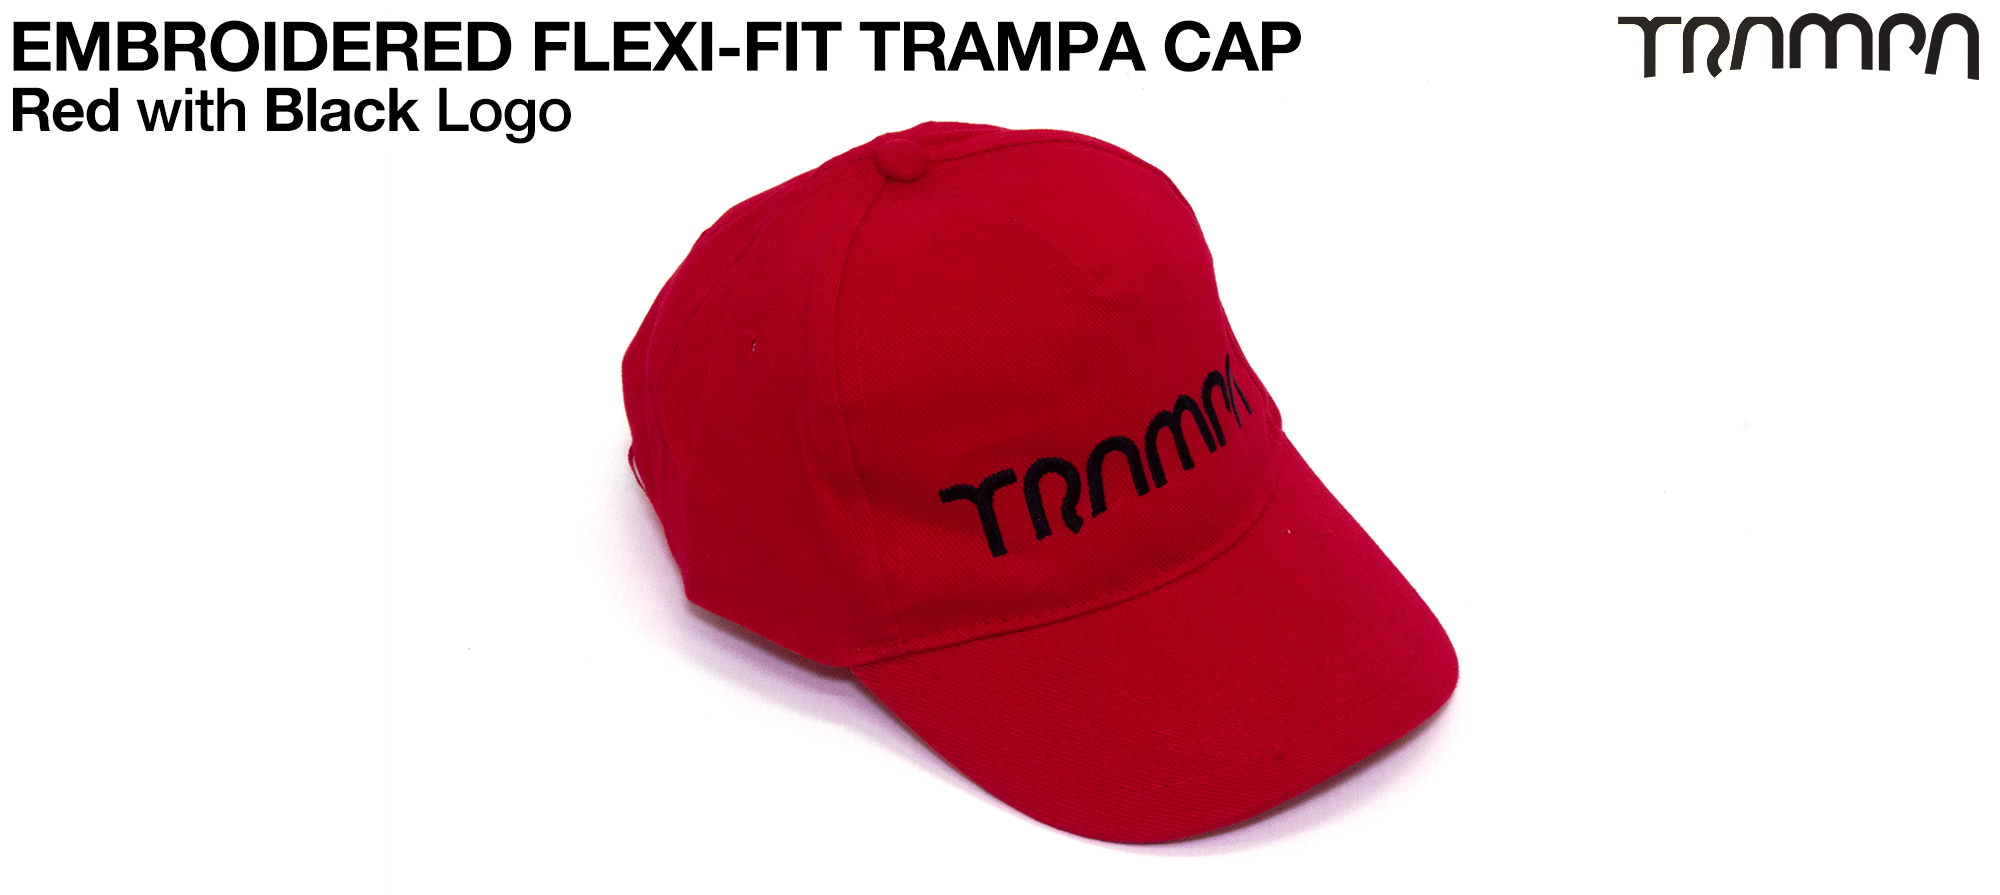 RED with BLACK Embroidered TRAMPA logo 5 Panel FLEXI-FIT Cap - SMALL / MEDIUM